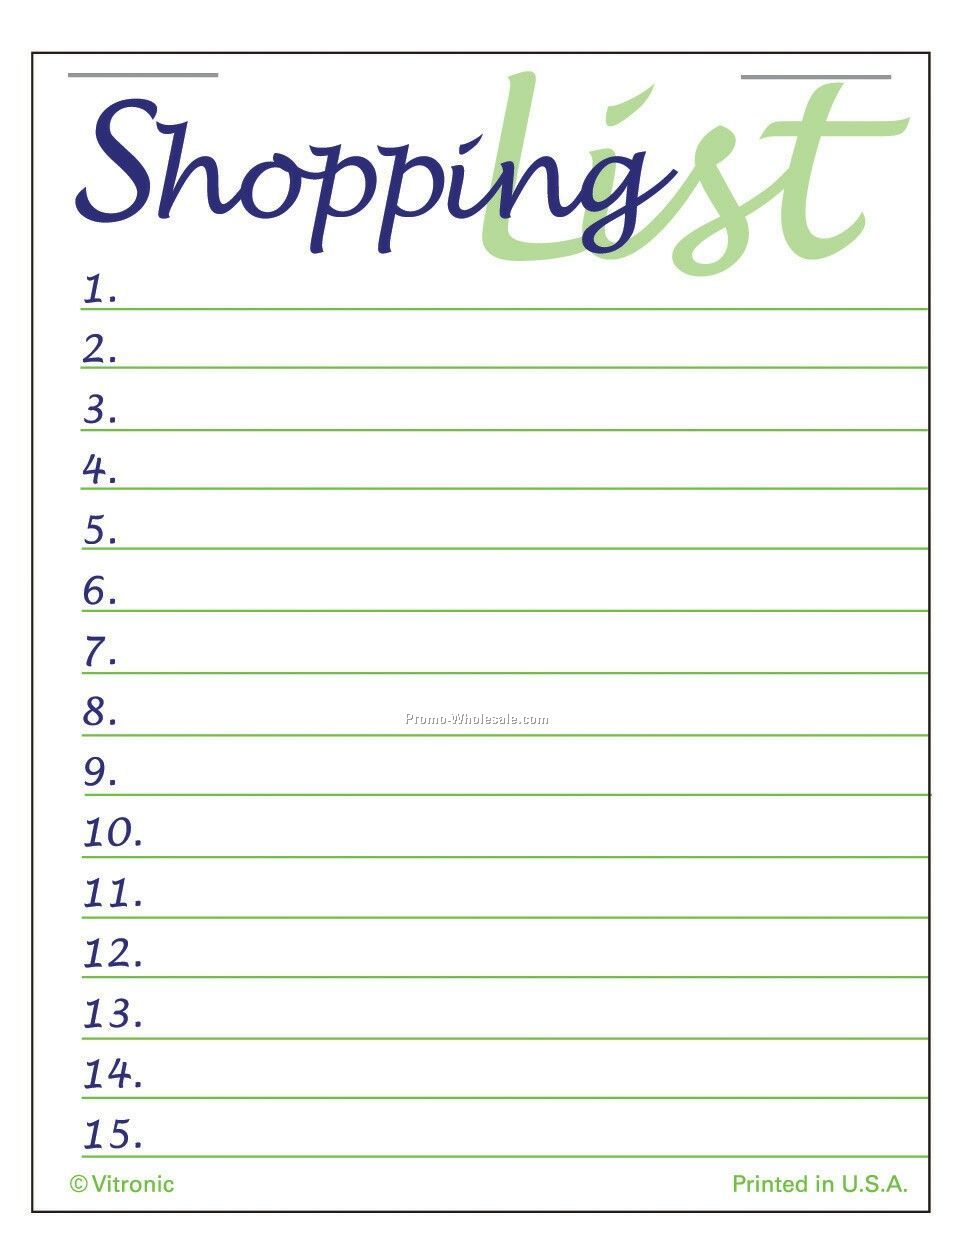 Shopping List Press-n-stick Pad (After 8/1/09)